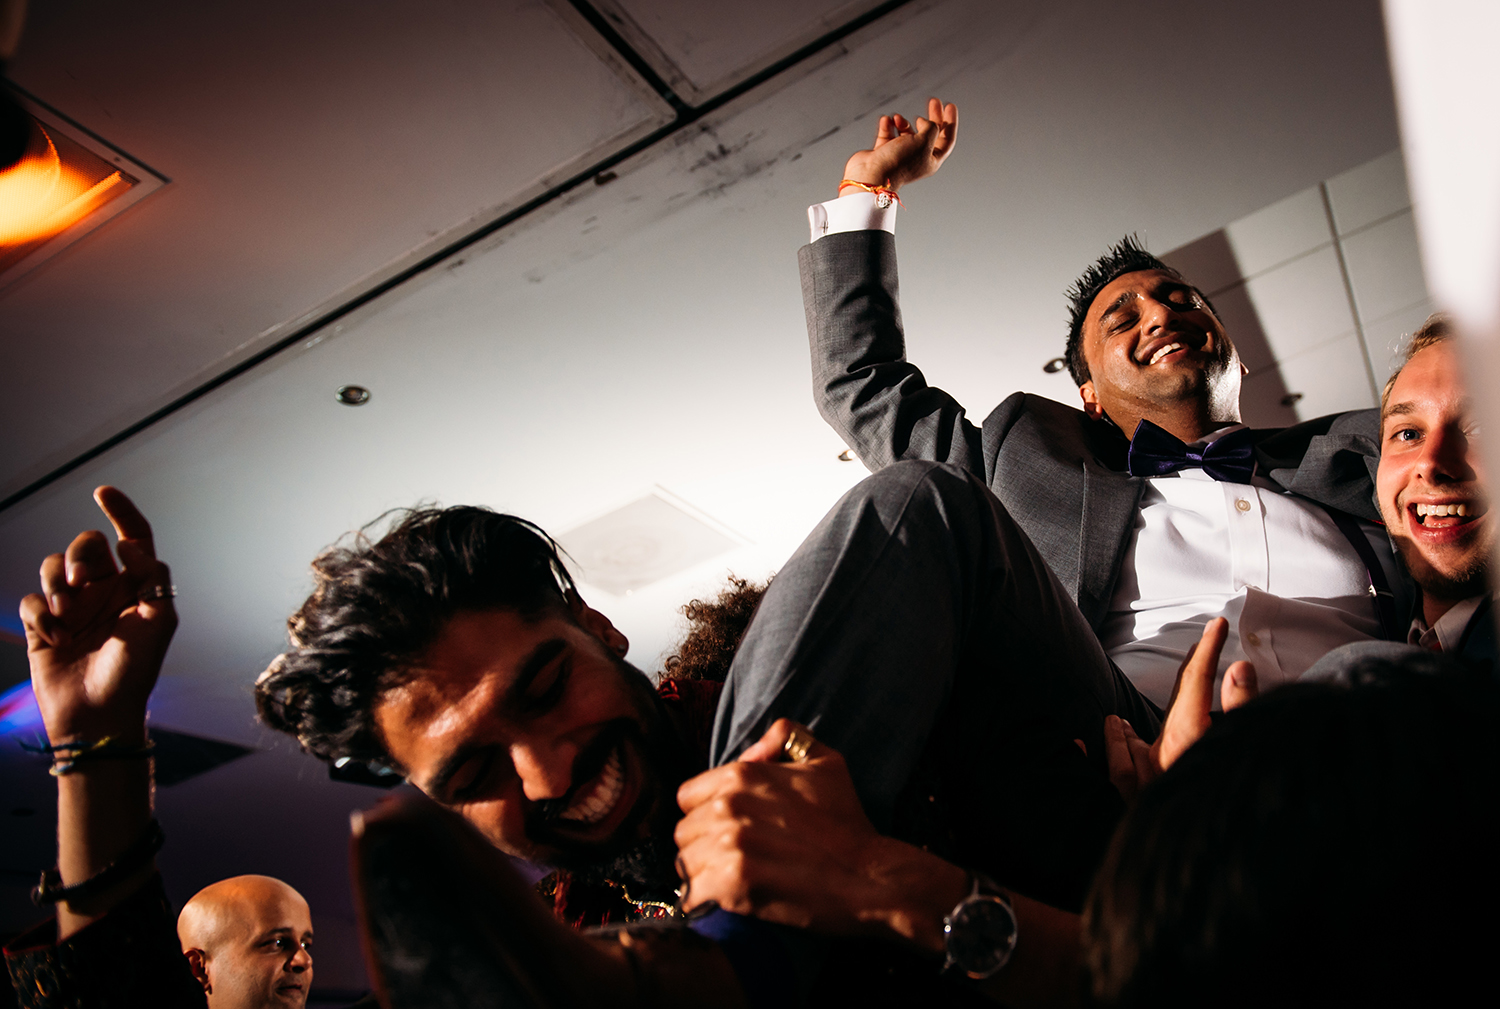  action photo of groom being lifted on the dancefloor 